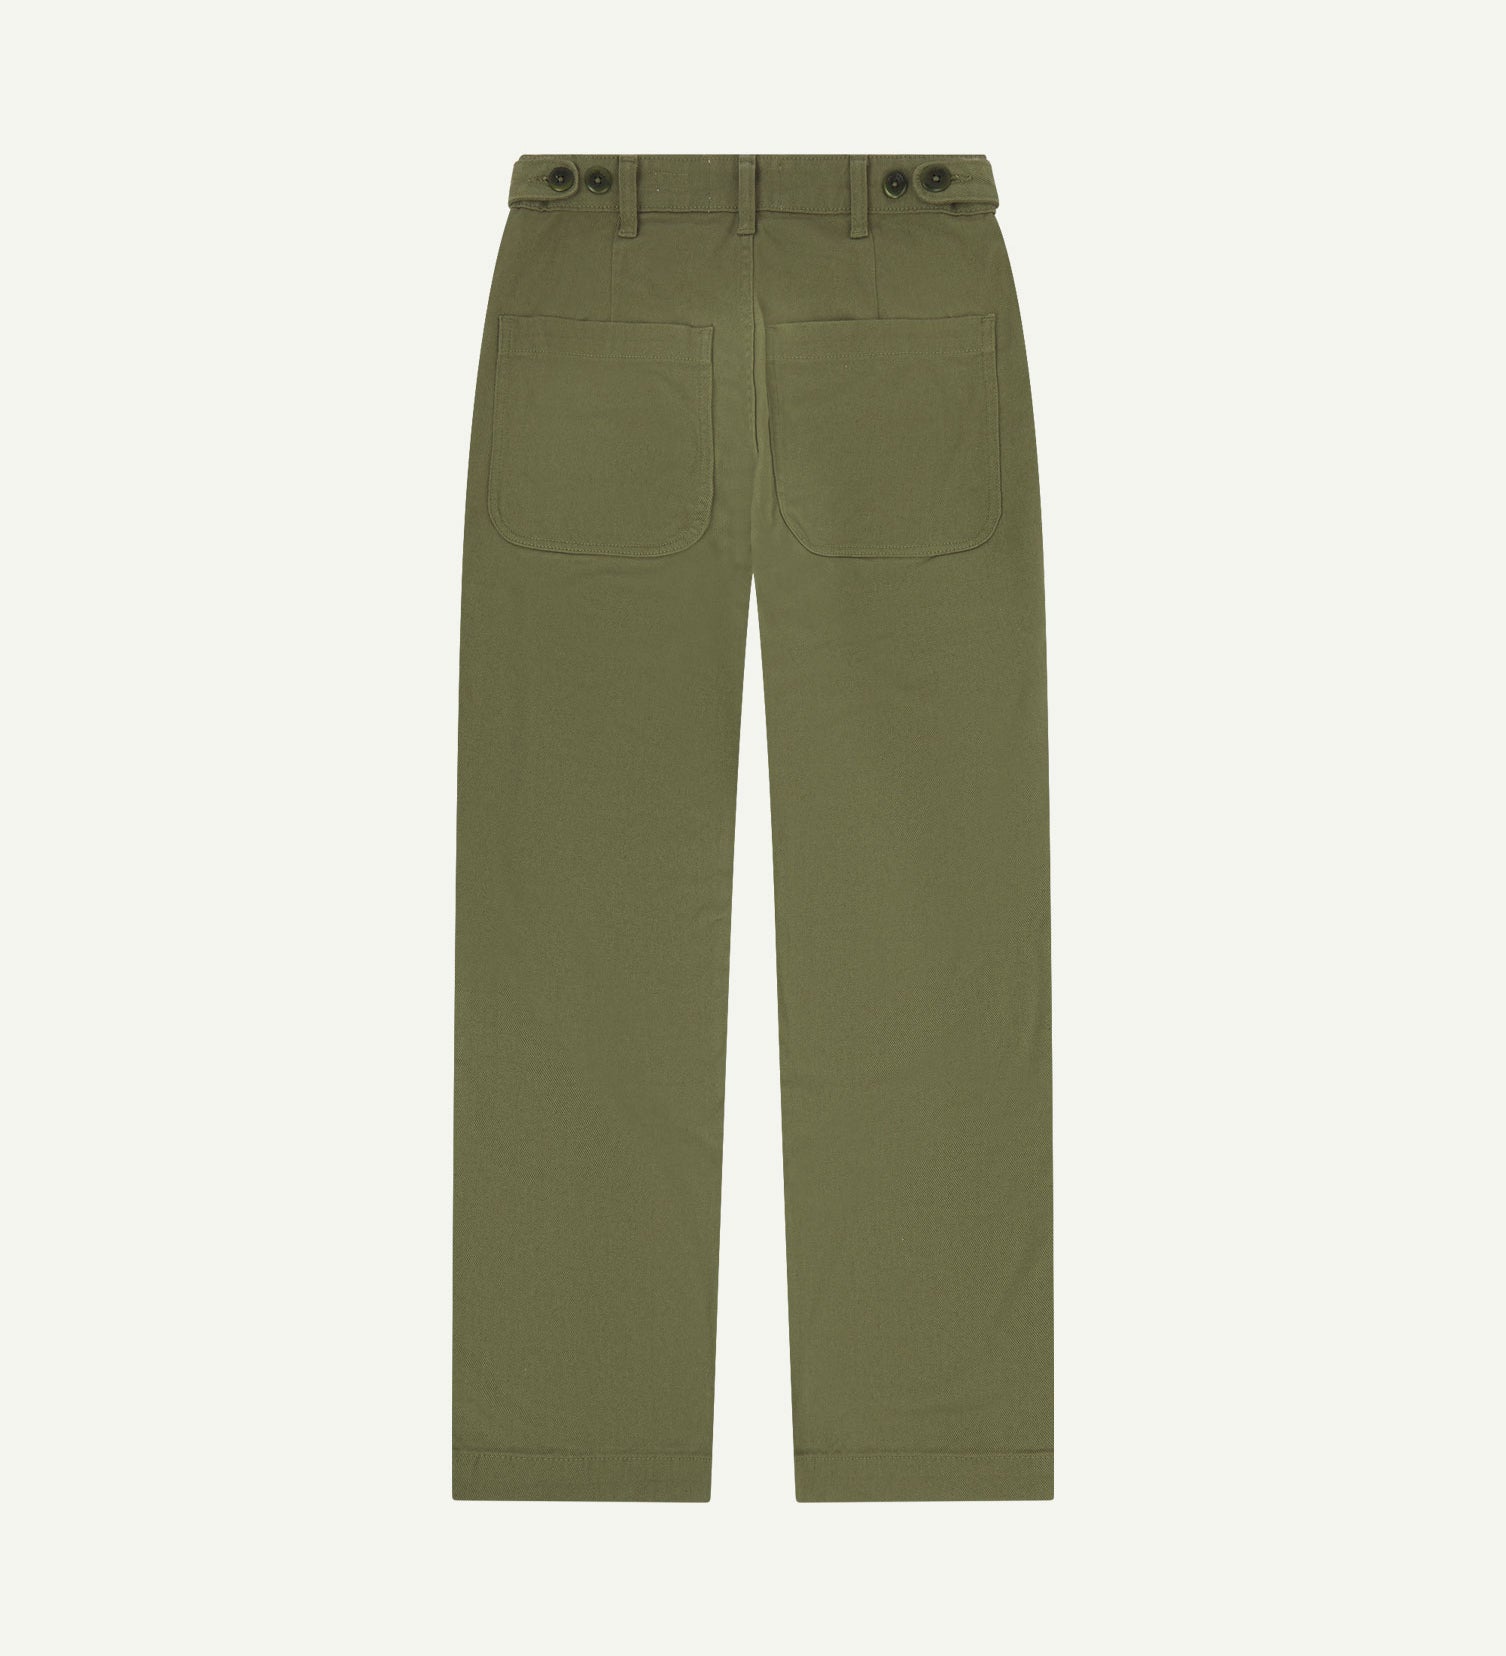 Back flat view of 5013 Uskees drill straight leg pants in moss green, with focus on on rear pockets and adjustable waistband with corozo buttons.